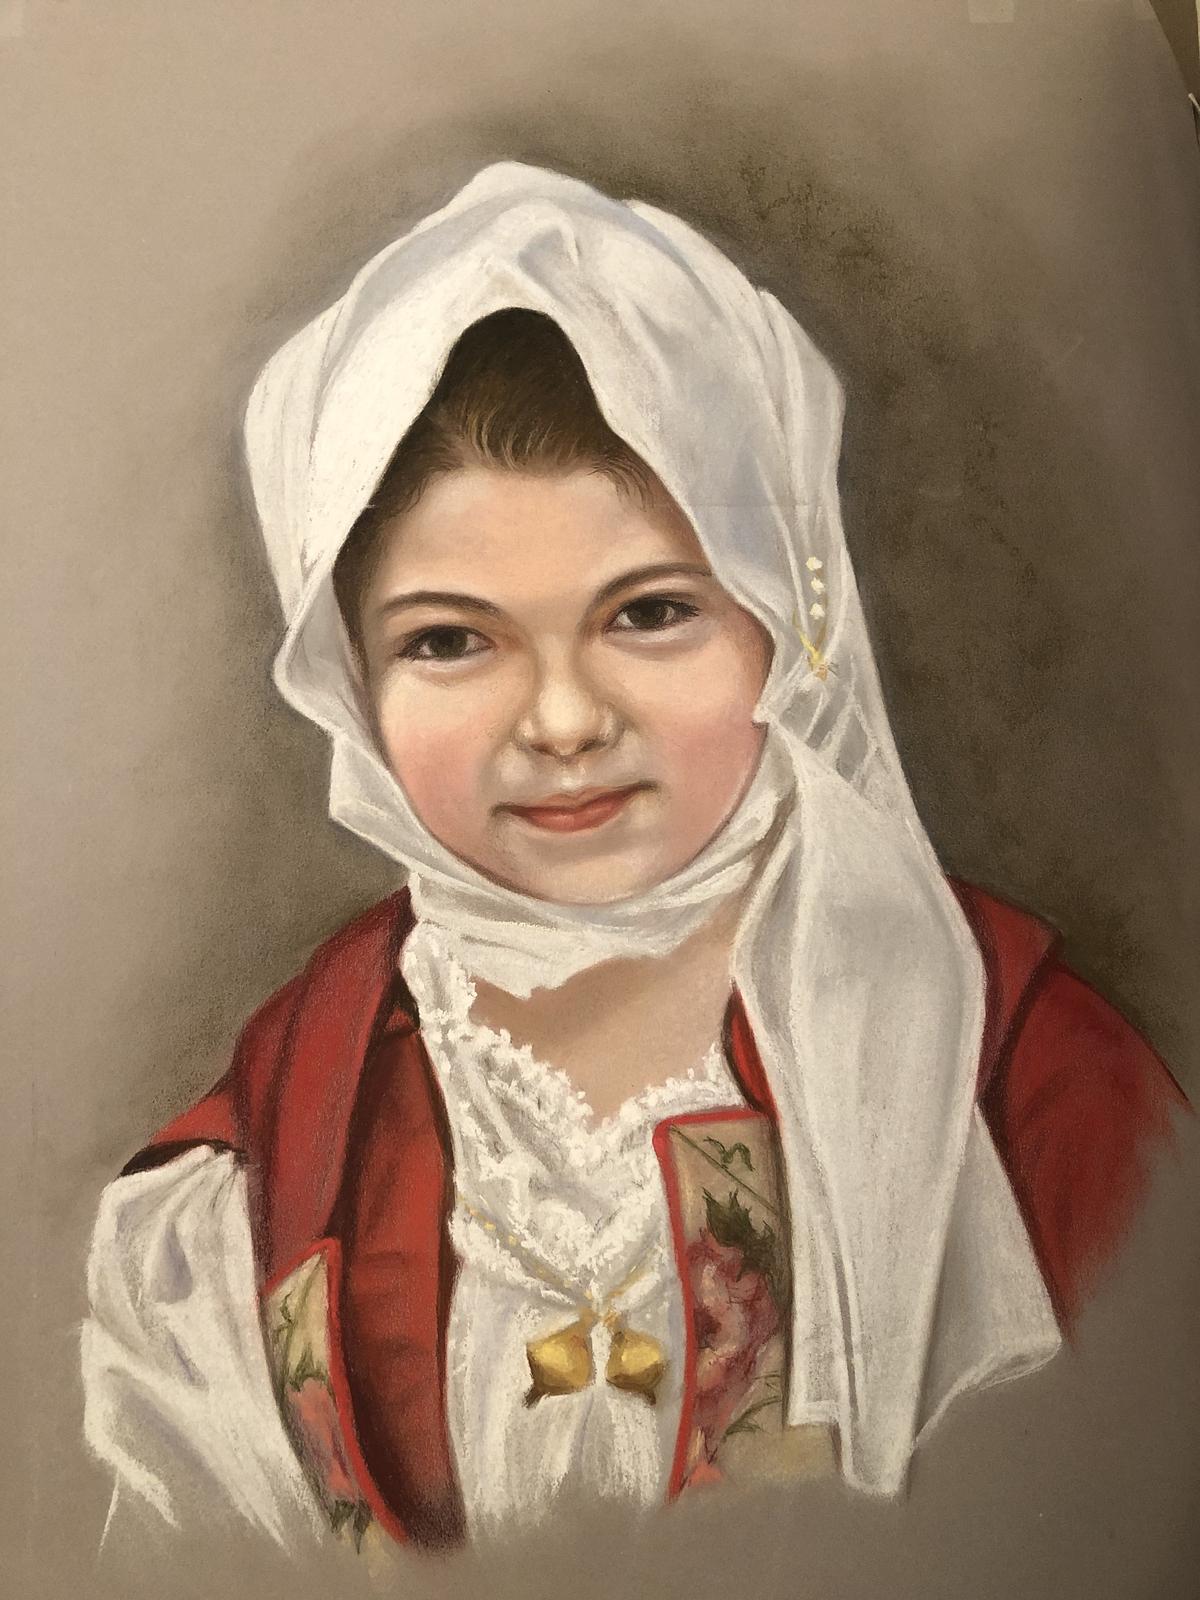 Southern European girl in traditional costume, by Barbara Schafer. Pastel. (Courtesy of Barbara Schafer)